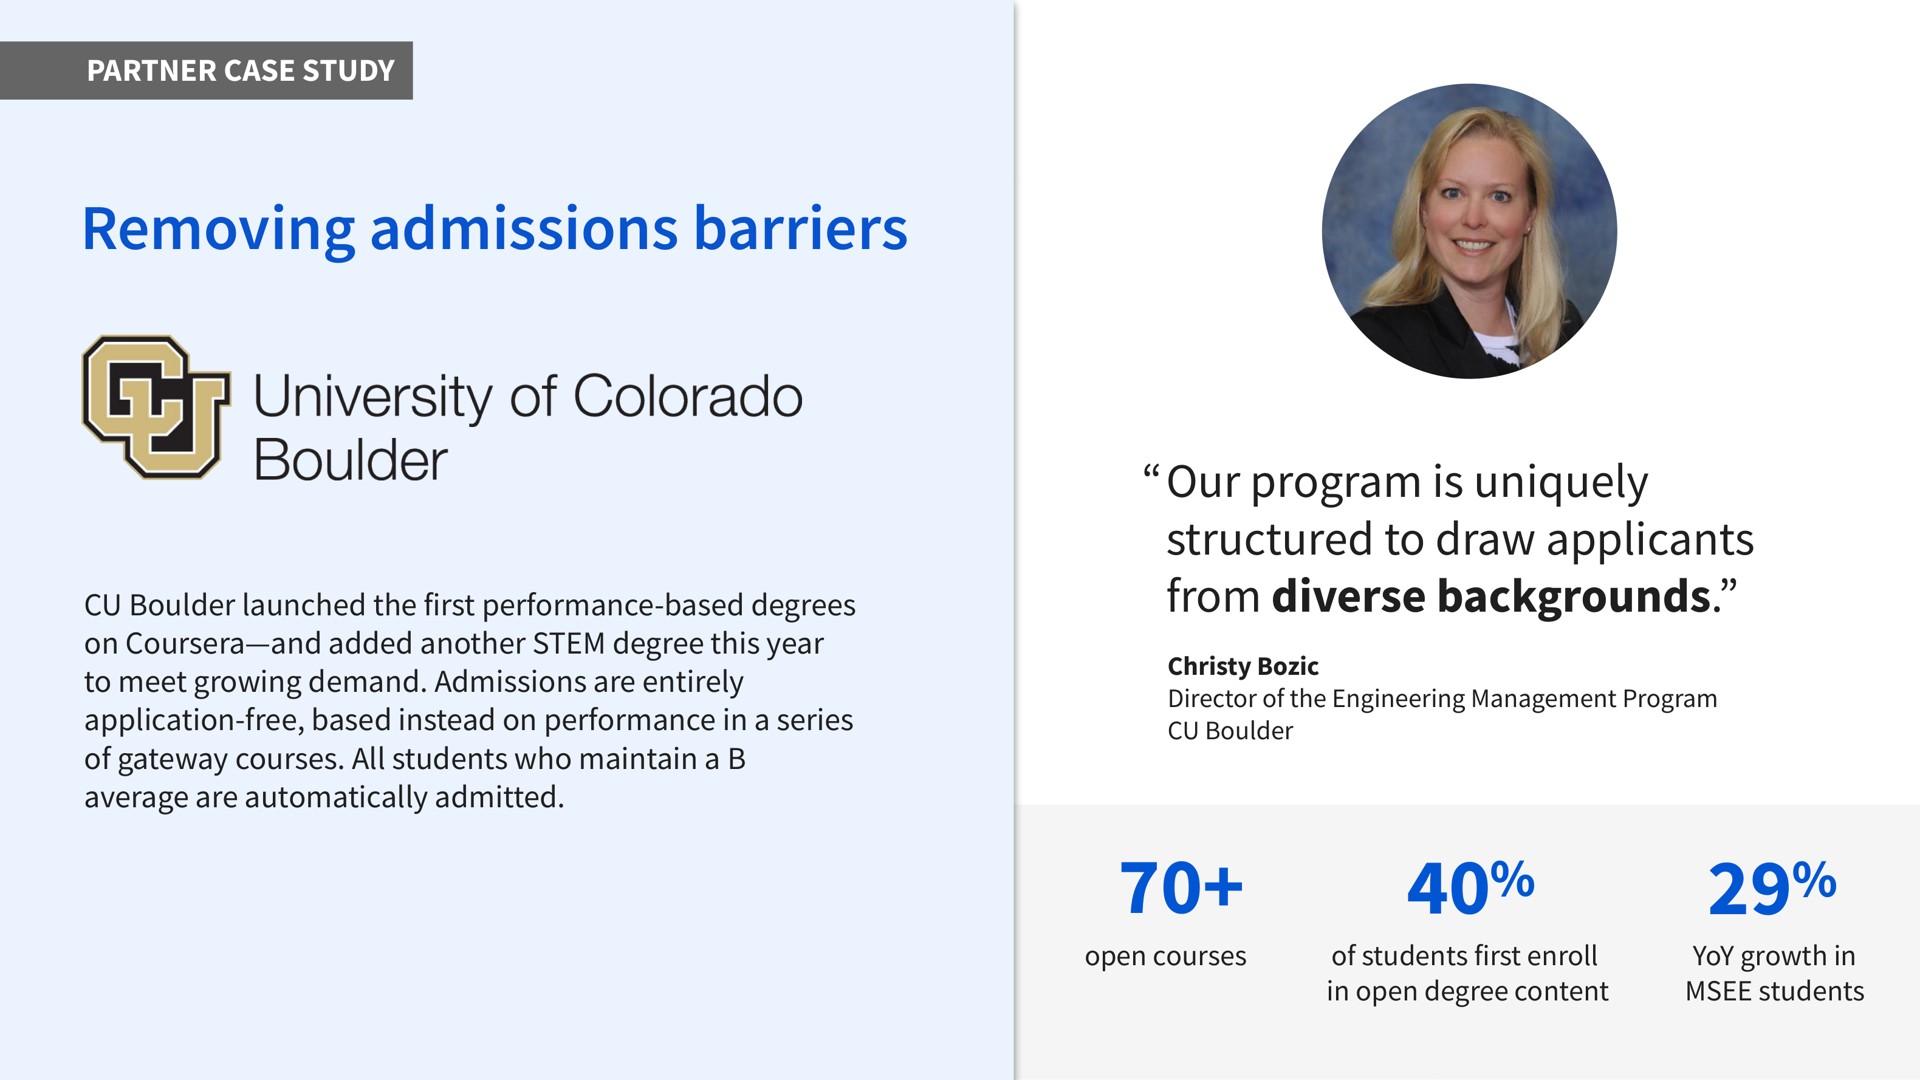 partner case study removing admissions barriers boulder launched the first performance based degrees on and added another stem degree this year to meet growing demand admissions are entirely application free based instead on performance in a series of gateway courses all students who maintain a average are automatically admitted our program is uniquely structured to draw applicants from diverse backgrounds director of the engineering management program boulder open courses of students first enroll in open degree content yoy growth in students university colorado | Coursera